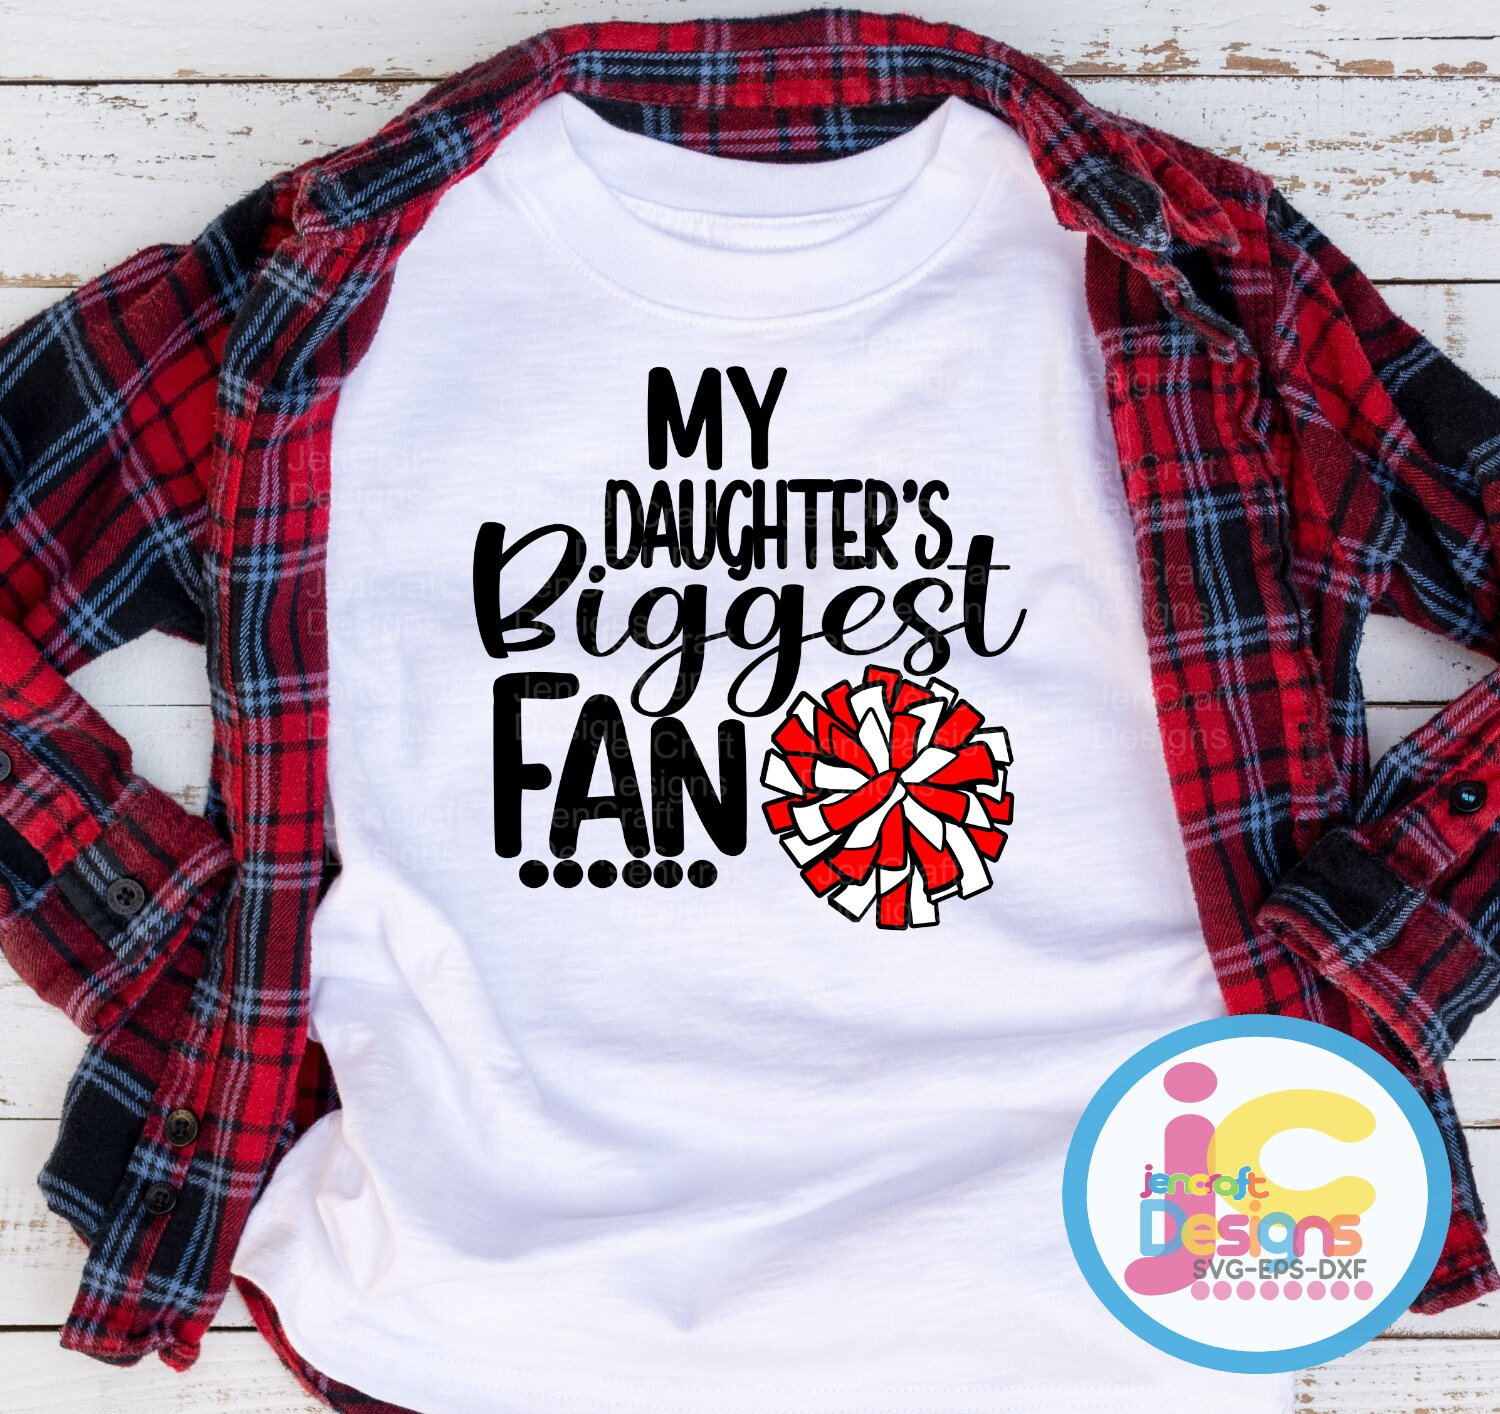 Cheer Mom Svg, My Daughters Biggest Fan Svg, Cheerleader Cheer Dad Svg, Svg  Design, Cut File Clipart Svg, Eps Dxf Png Cricut Silhouette 